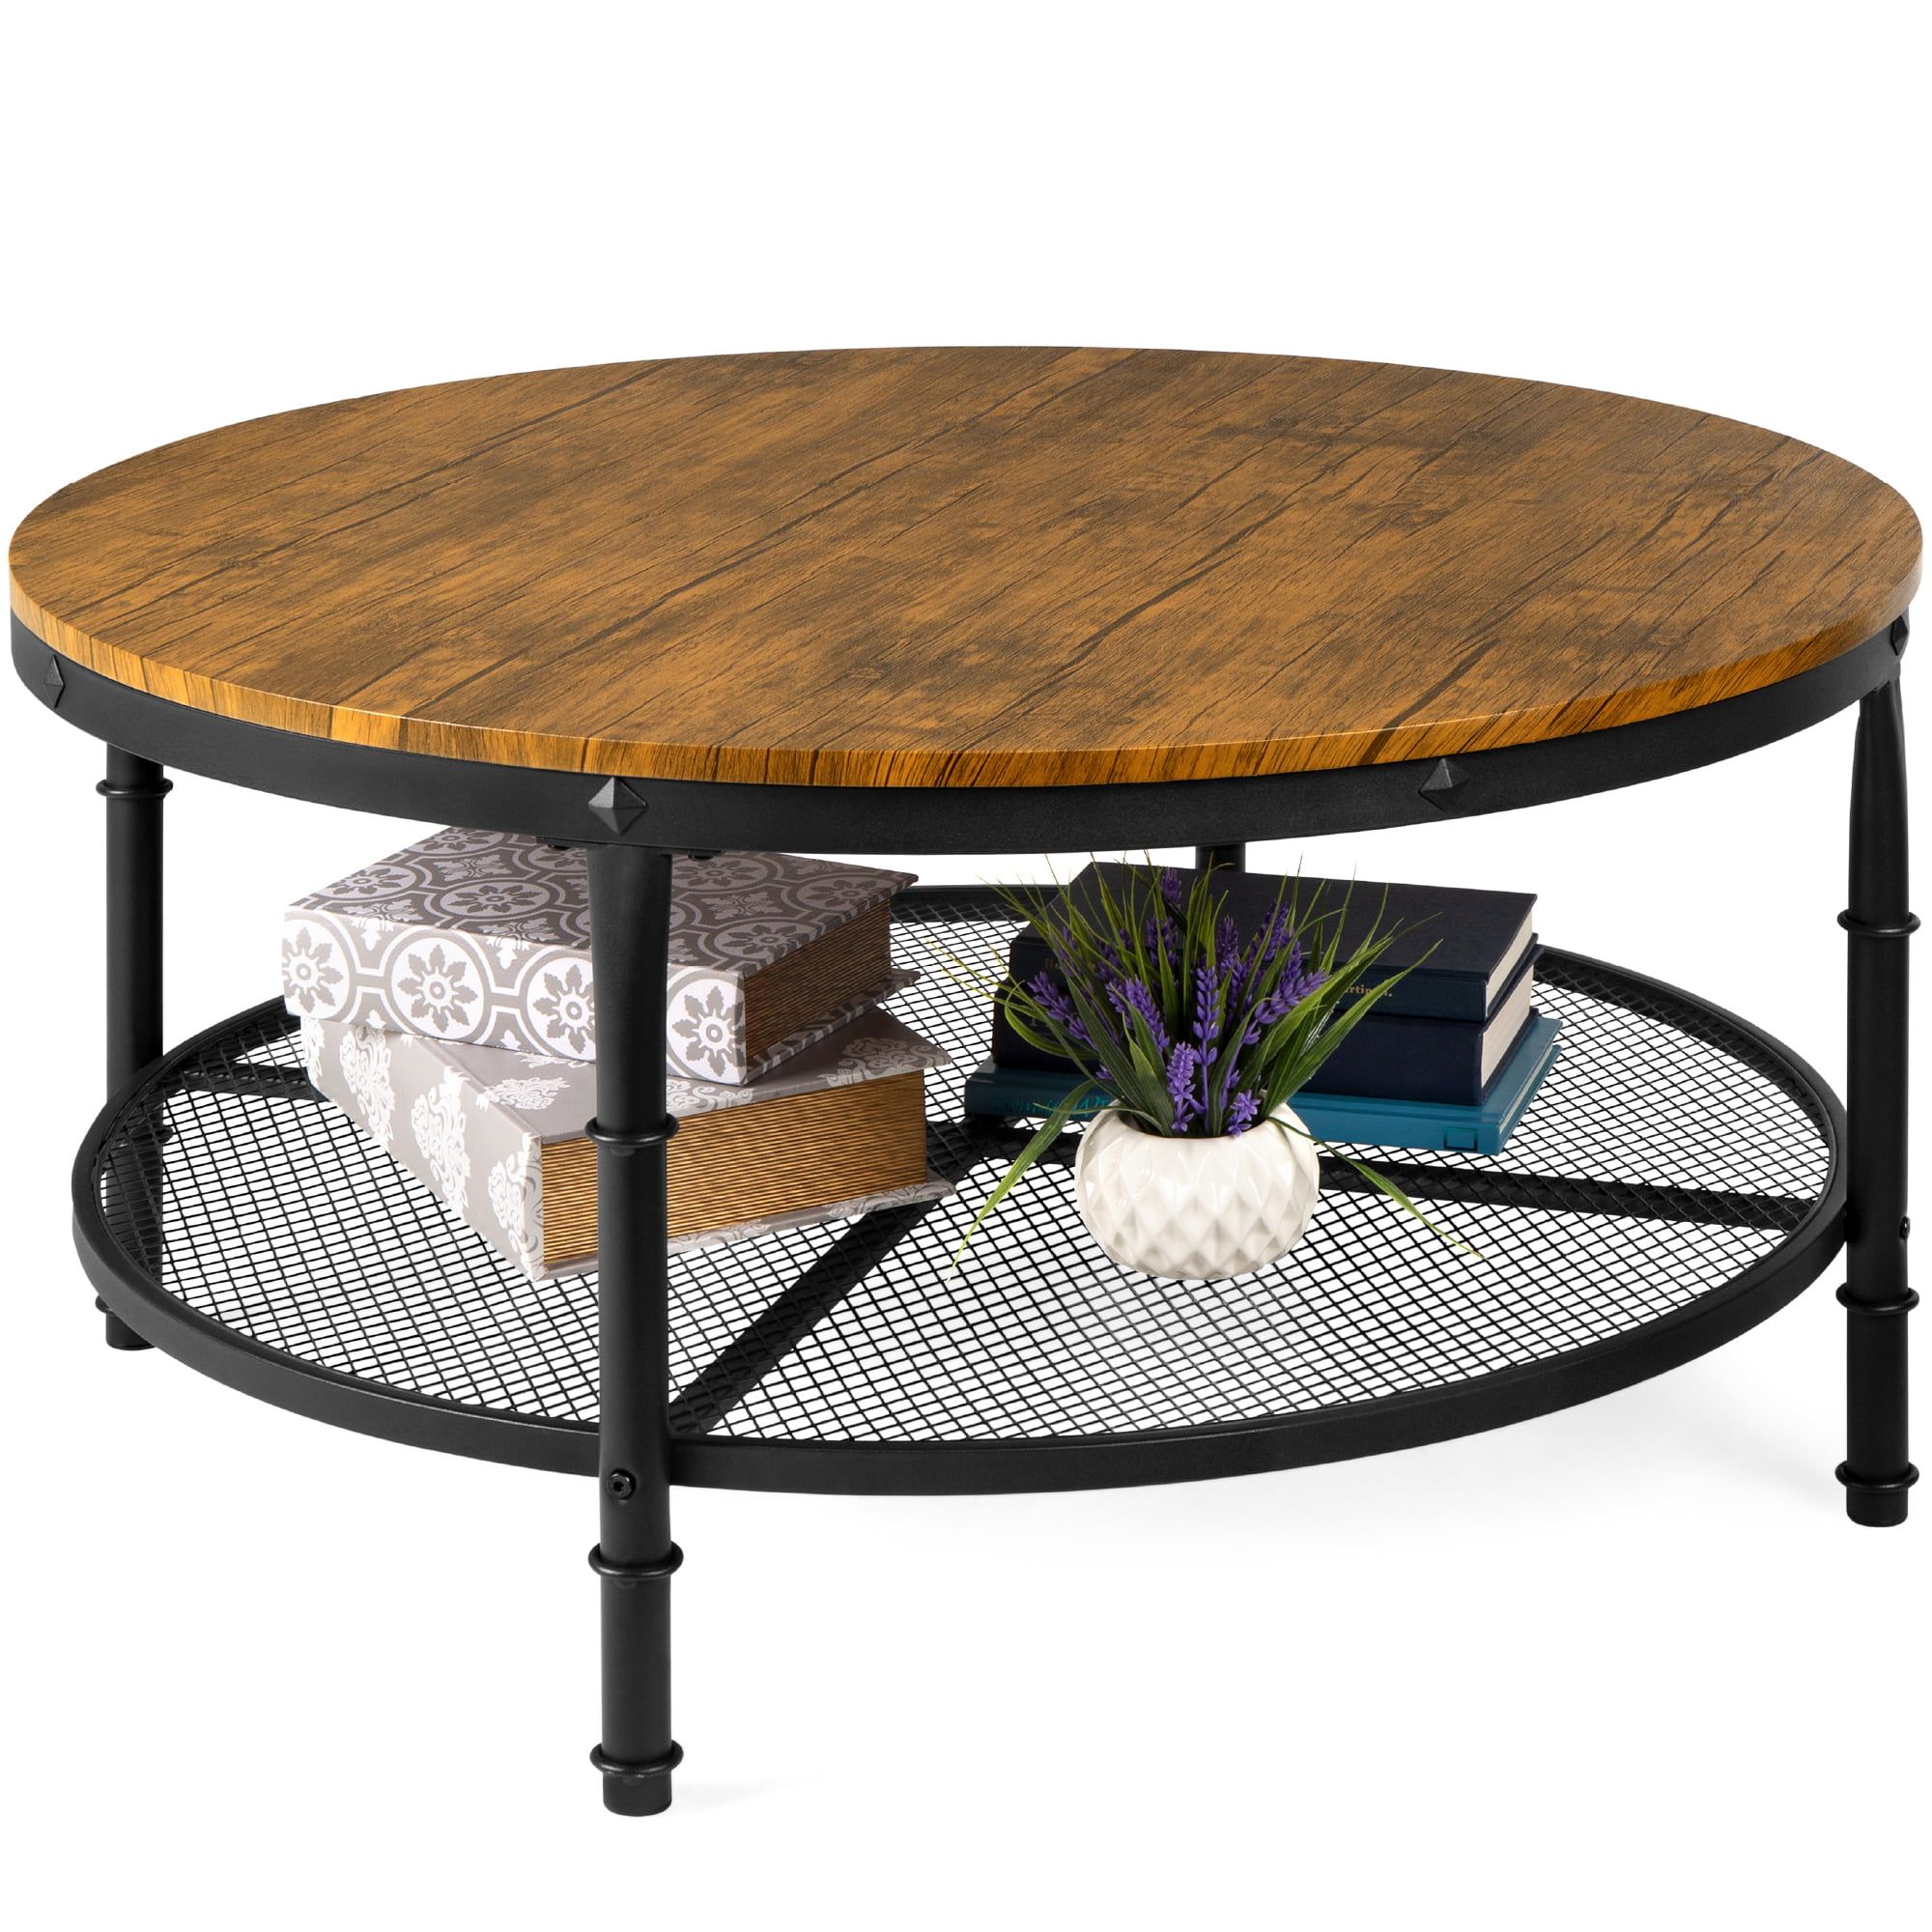 Best Choice Products 2 Tier Round Coffee Table, Rustic Steel Accent Throughout Coffee Tables For 4 6 People (View 4 of 15)